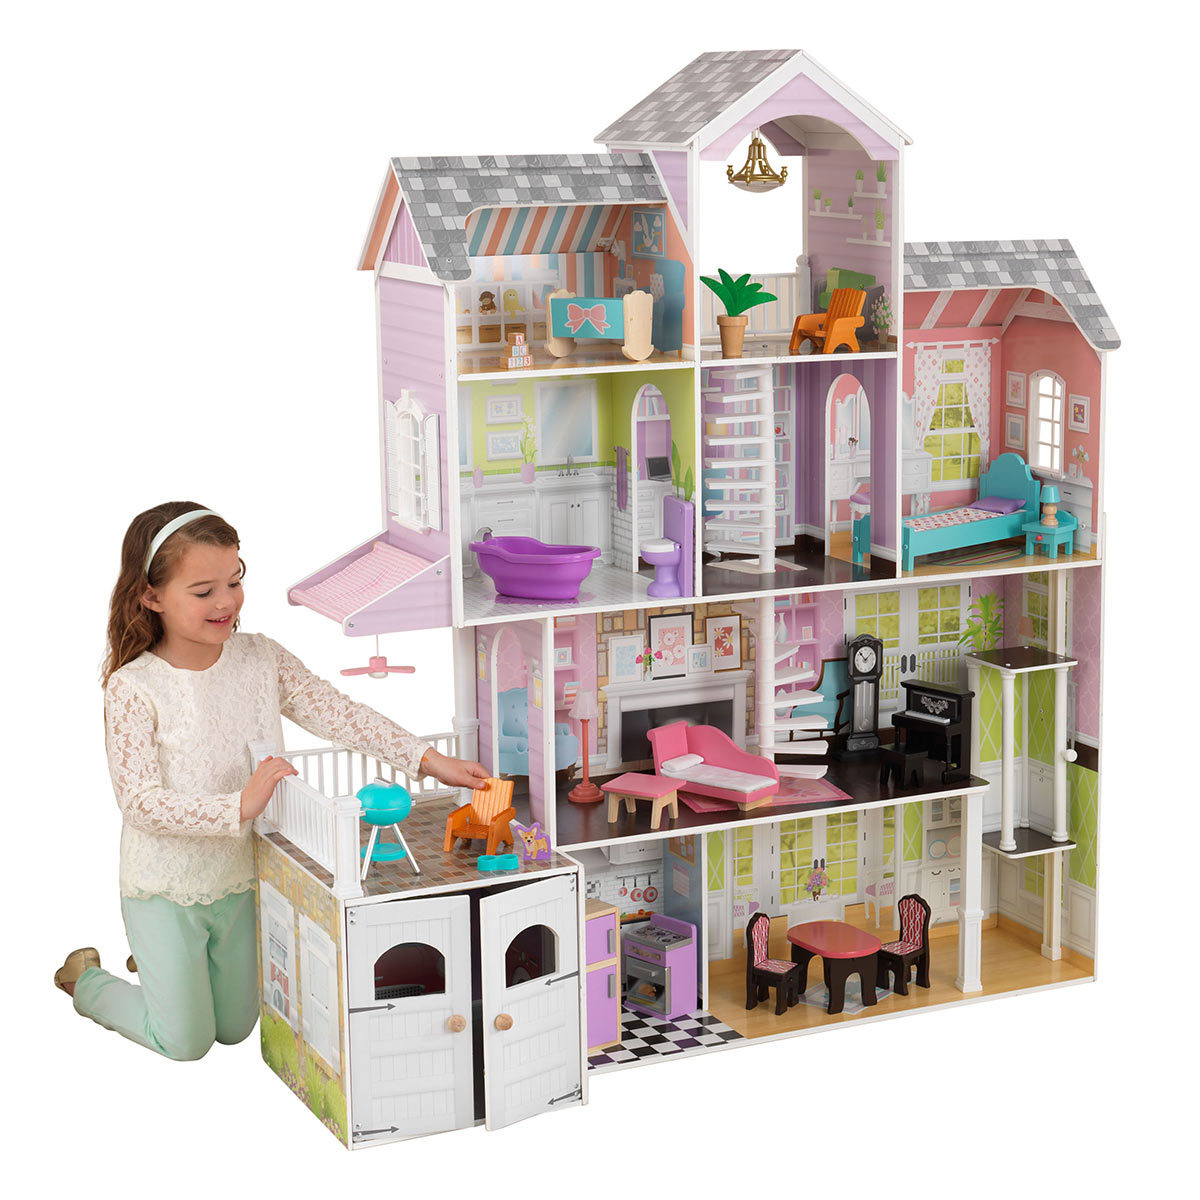 KidKraft Grand Estate Dollhouse + 26 Pieces Of Furniture (3+ Years